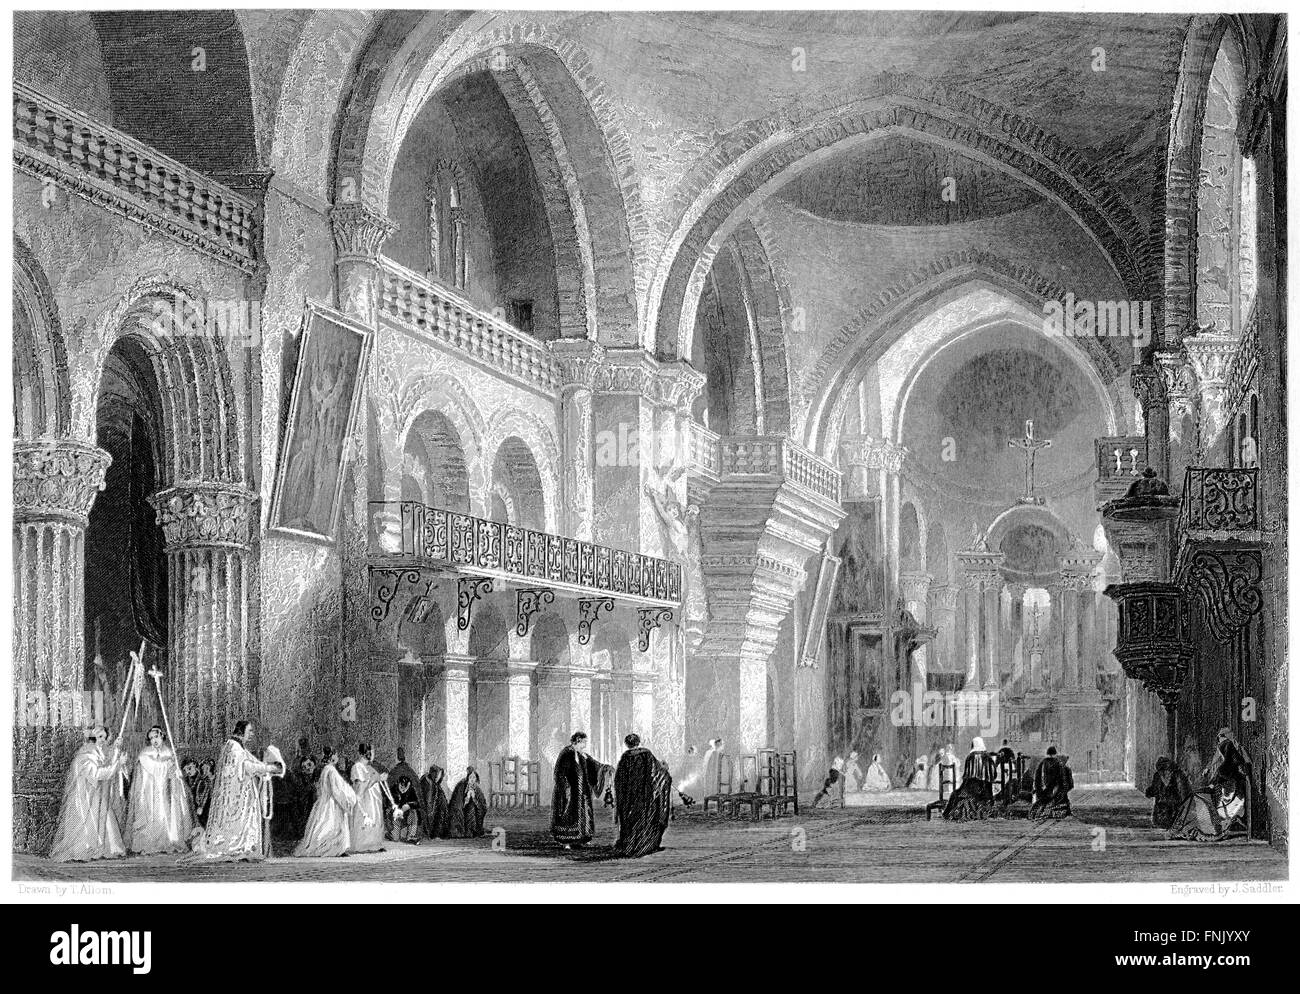 An engraving of The Cathedral, Angouleme scanned at high resolution from a book printed in 1876. Believed copyright free. Stock Photo